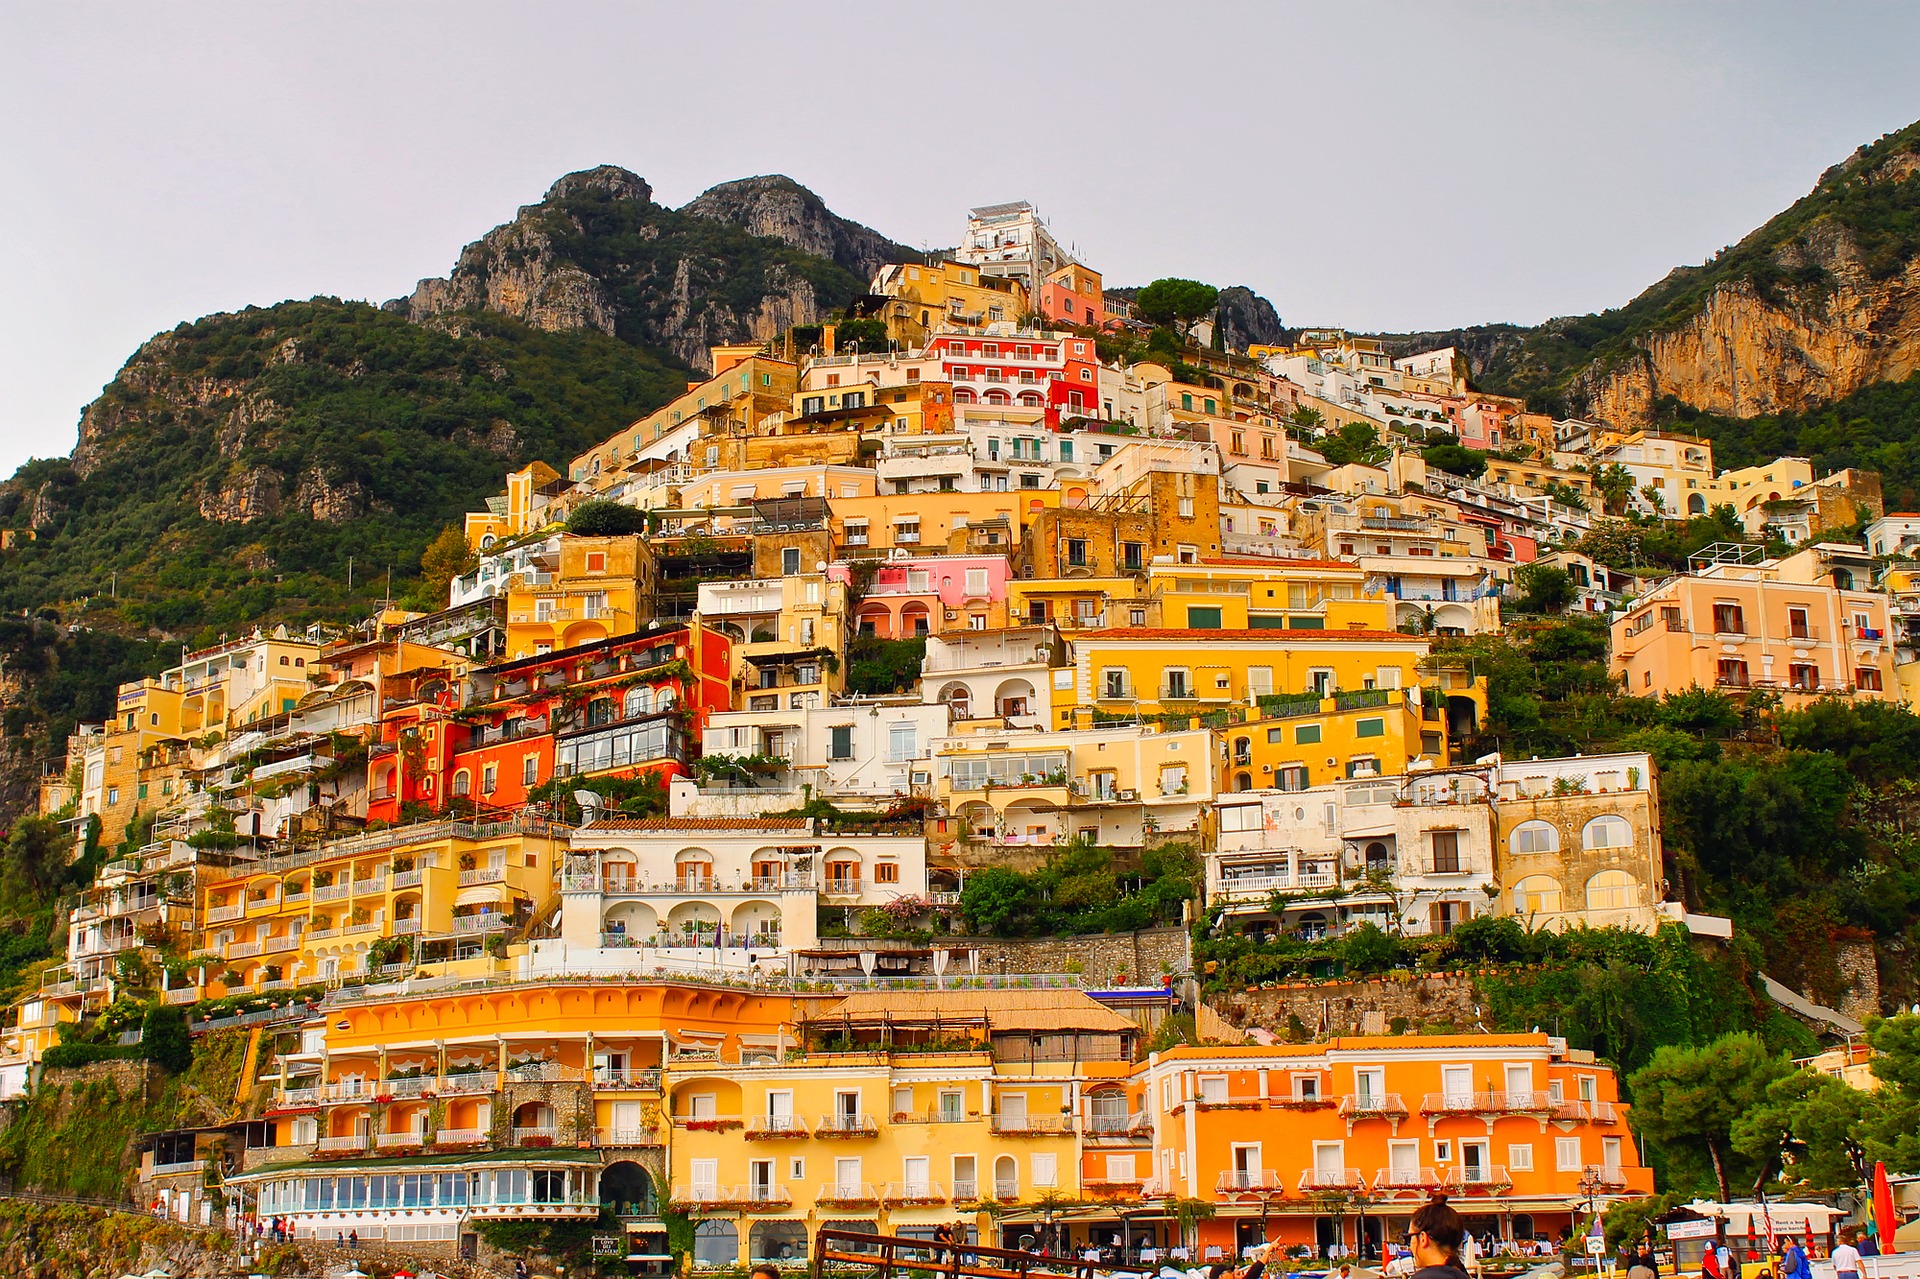 Why Positano should be on your bucket List?